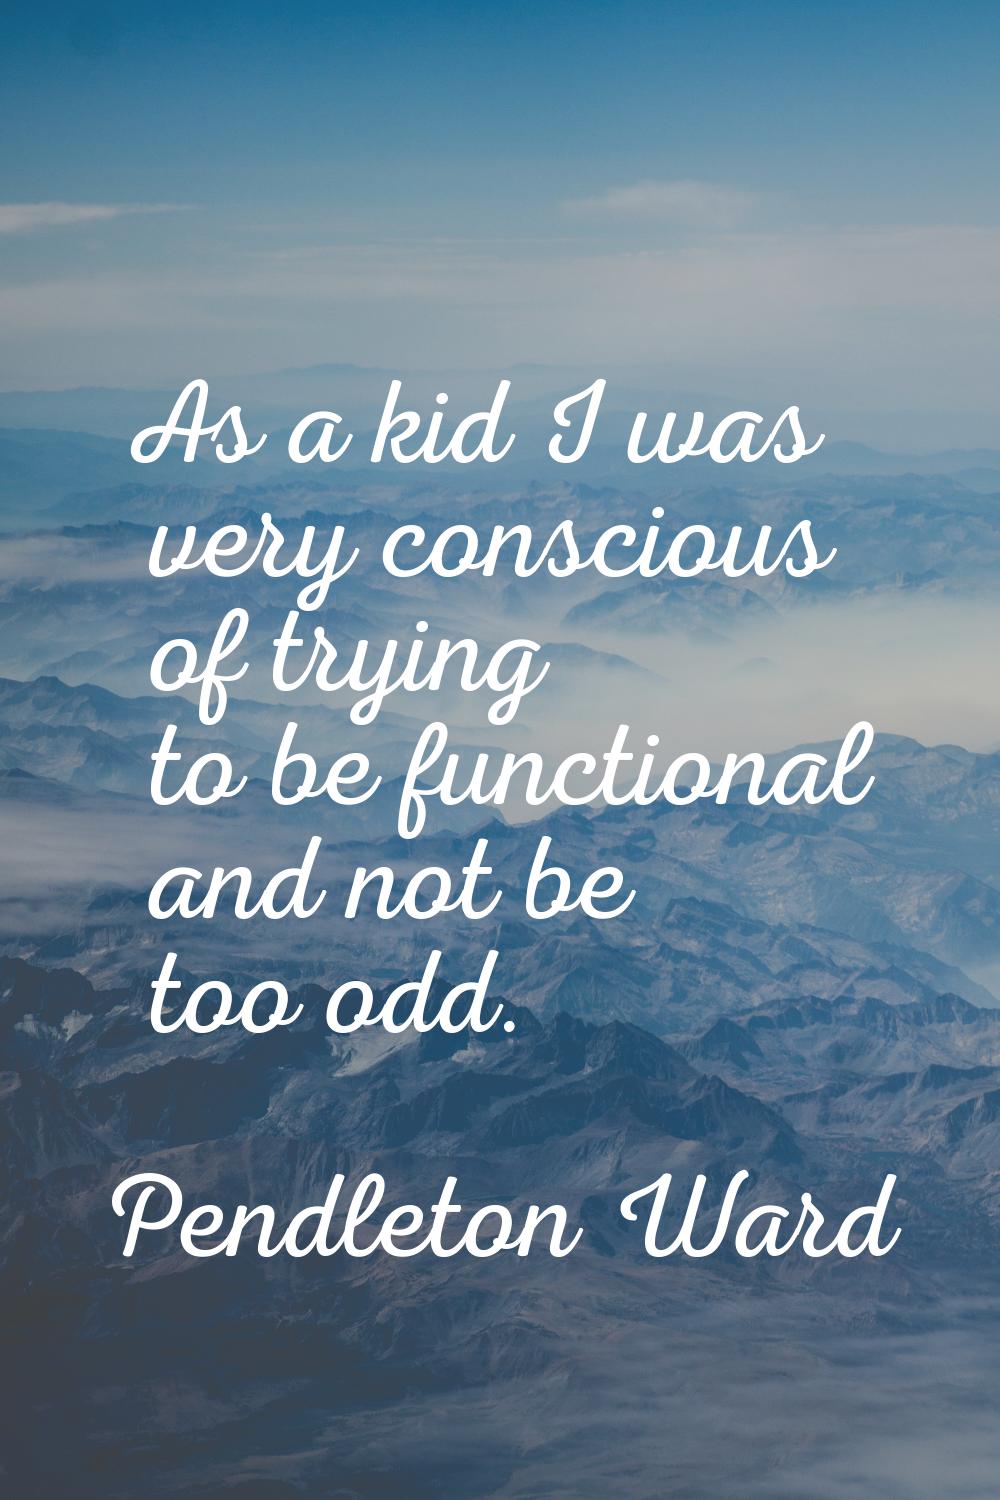 As a kid I was very conscious of trying to be functional and not be too odd.